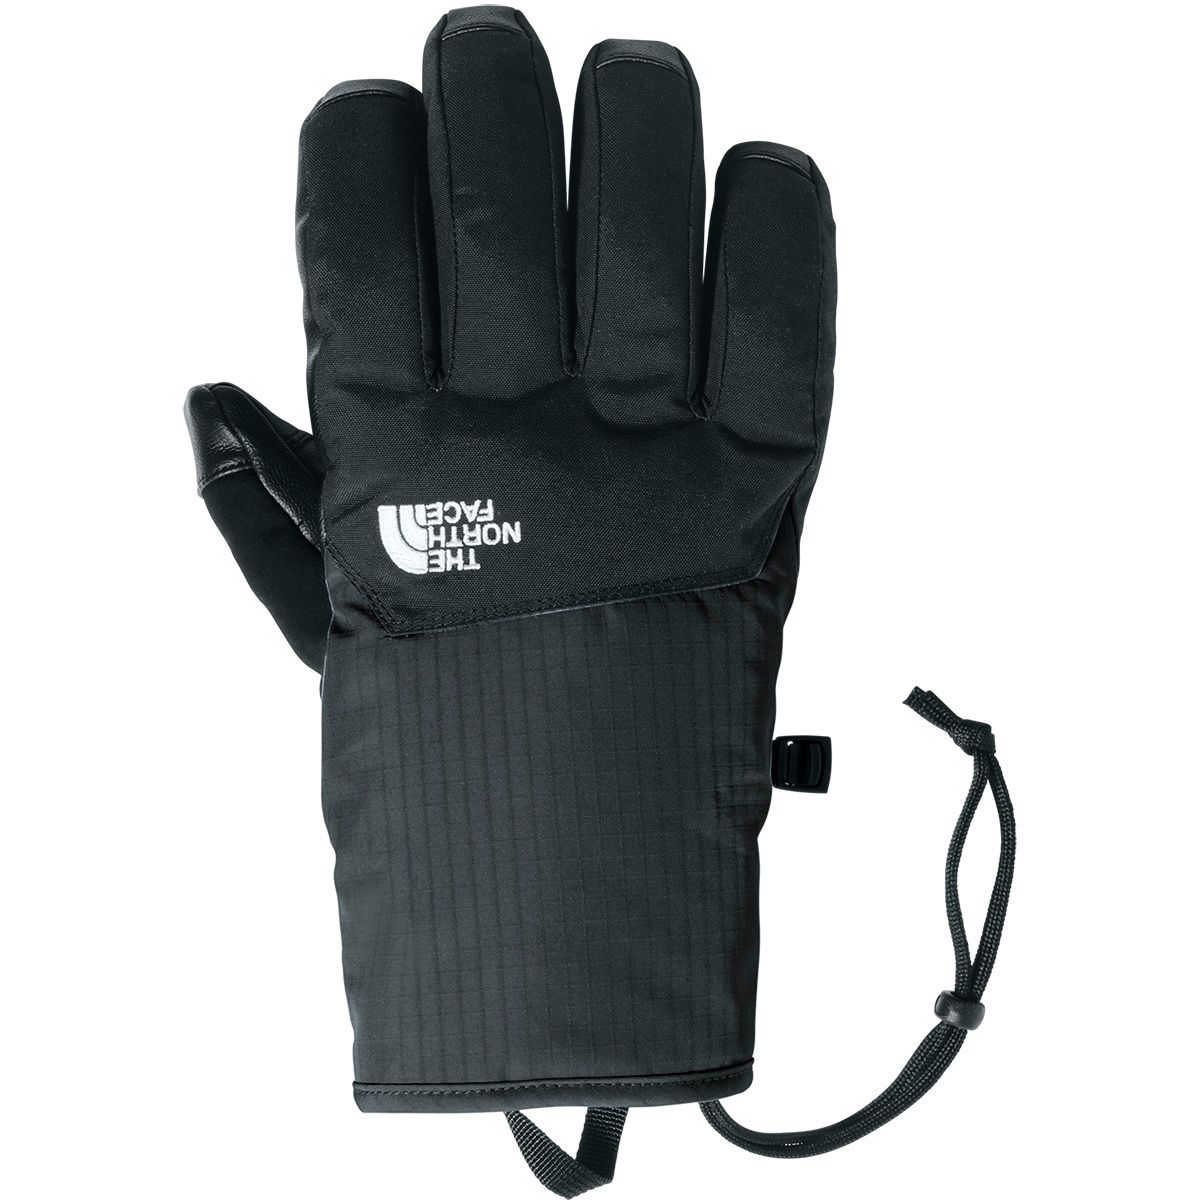 north face gloves review